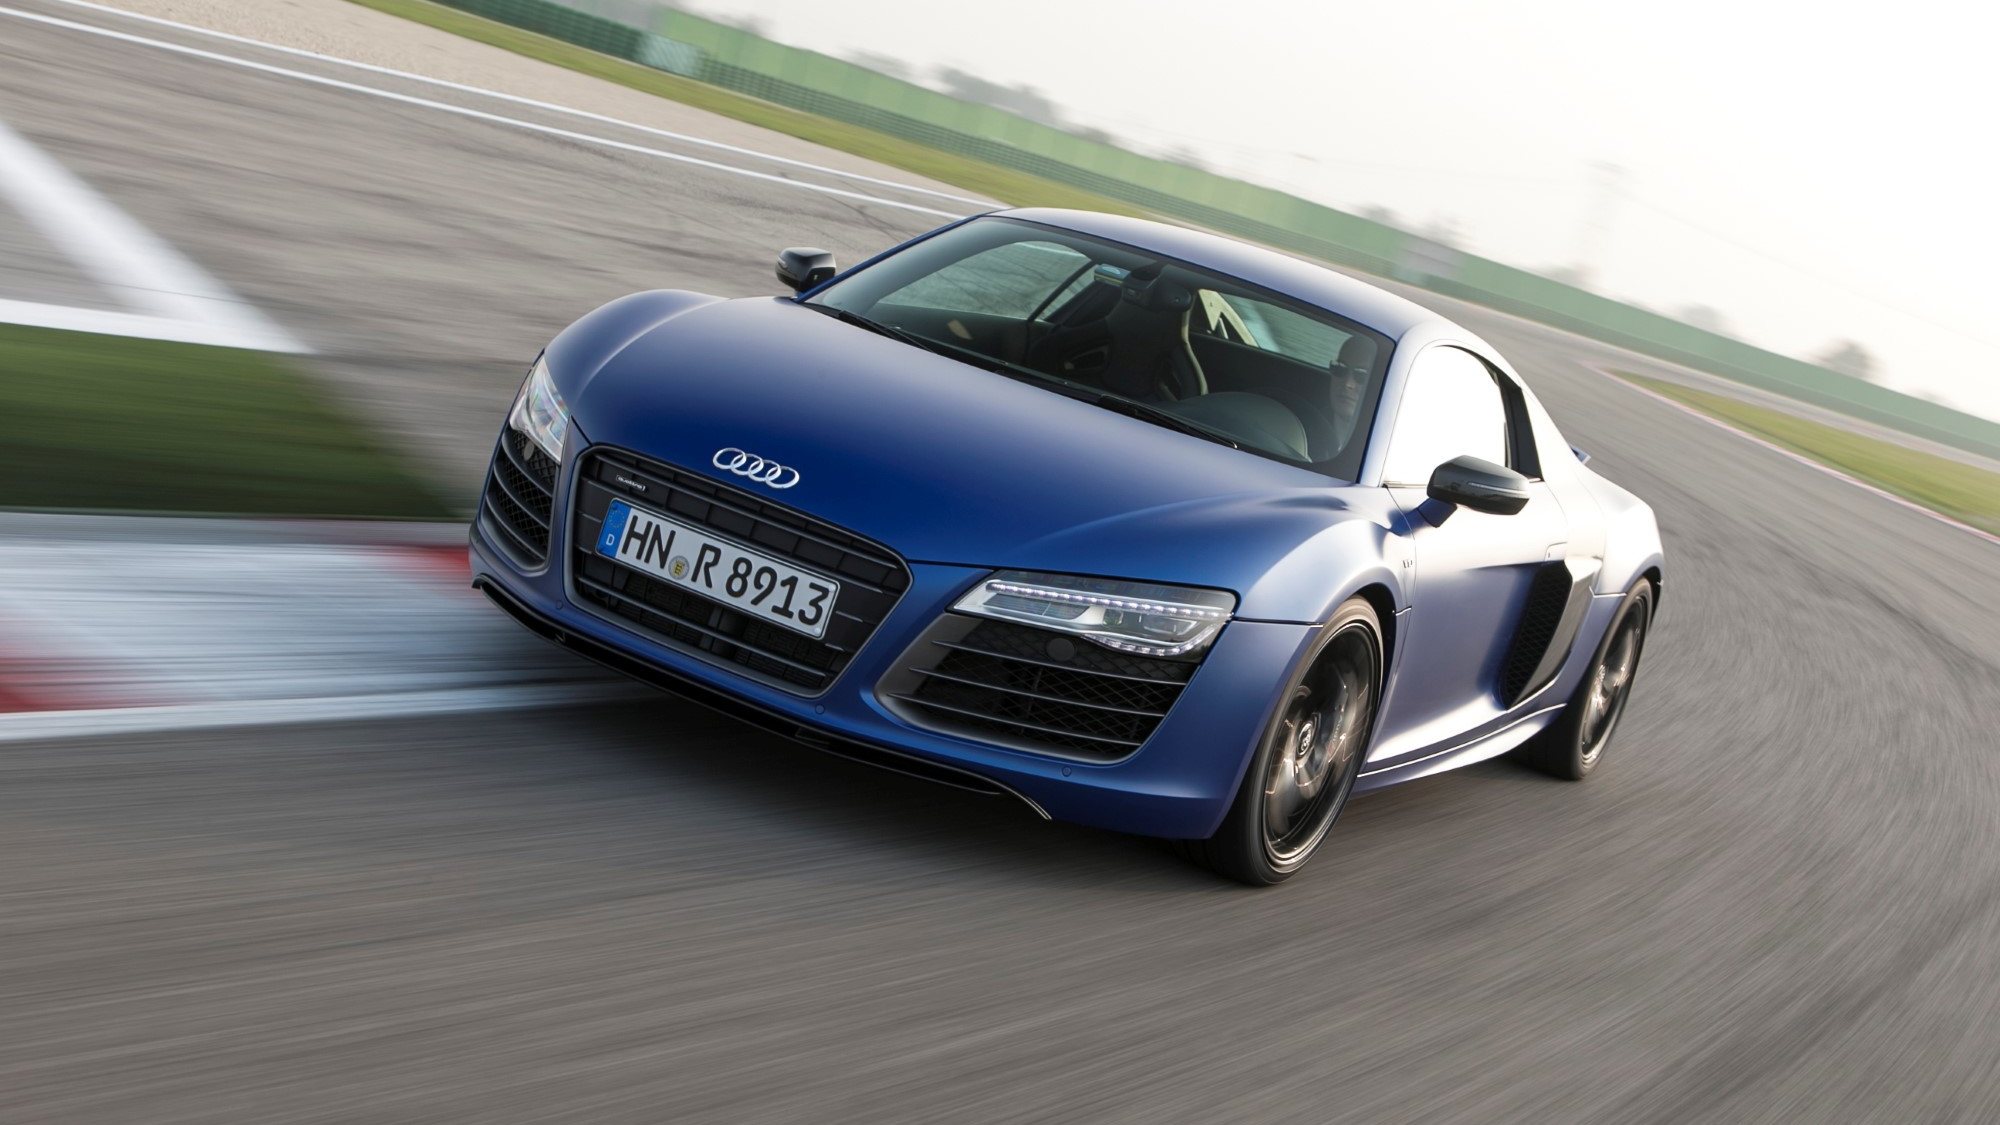 2014 Audi R8 Pricing Edges Up, DualClutch Gearbox On Offer